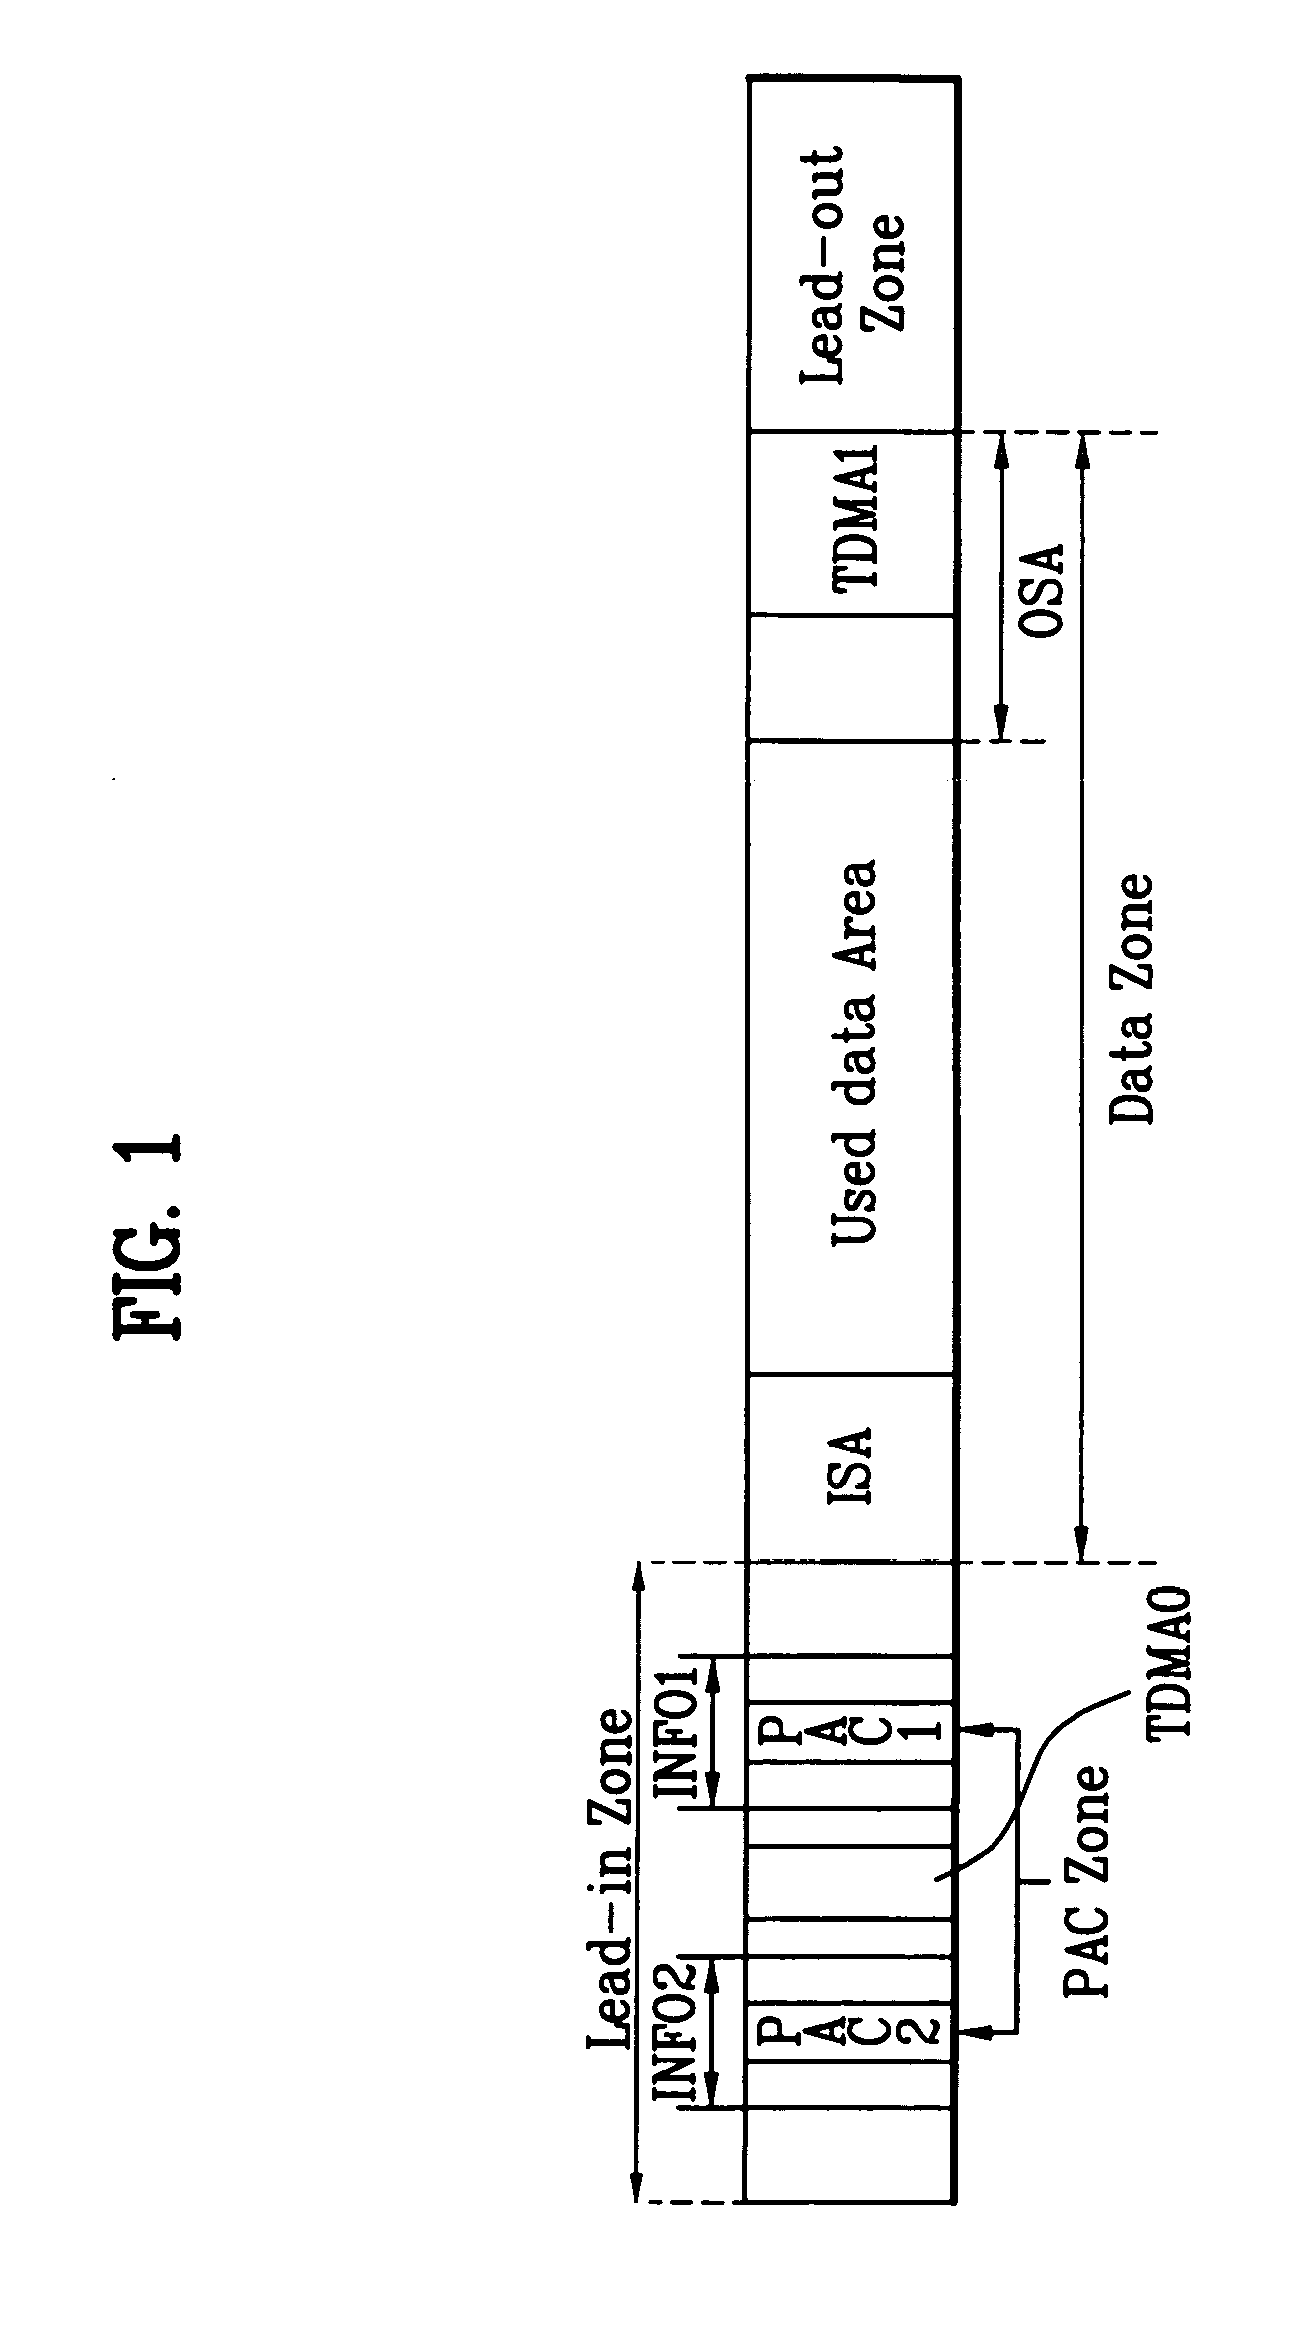 Recording medium with physical access control (PAC) cluster thereon and apparatus and methods for forming, recording, and reproducing the recording medium